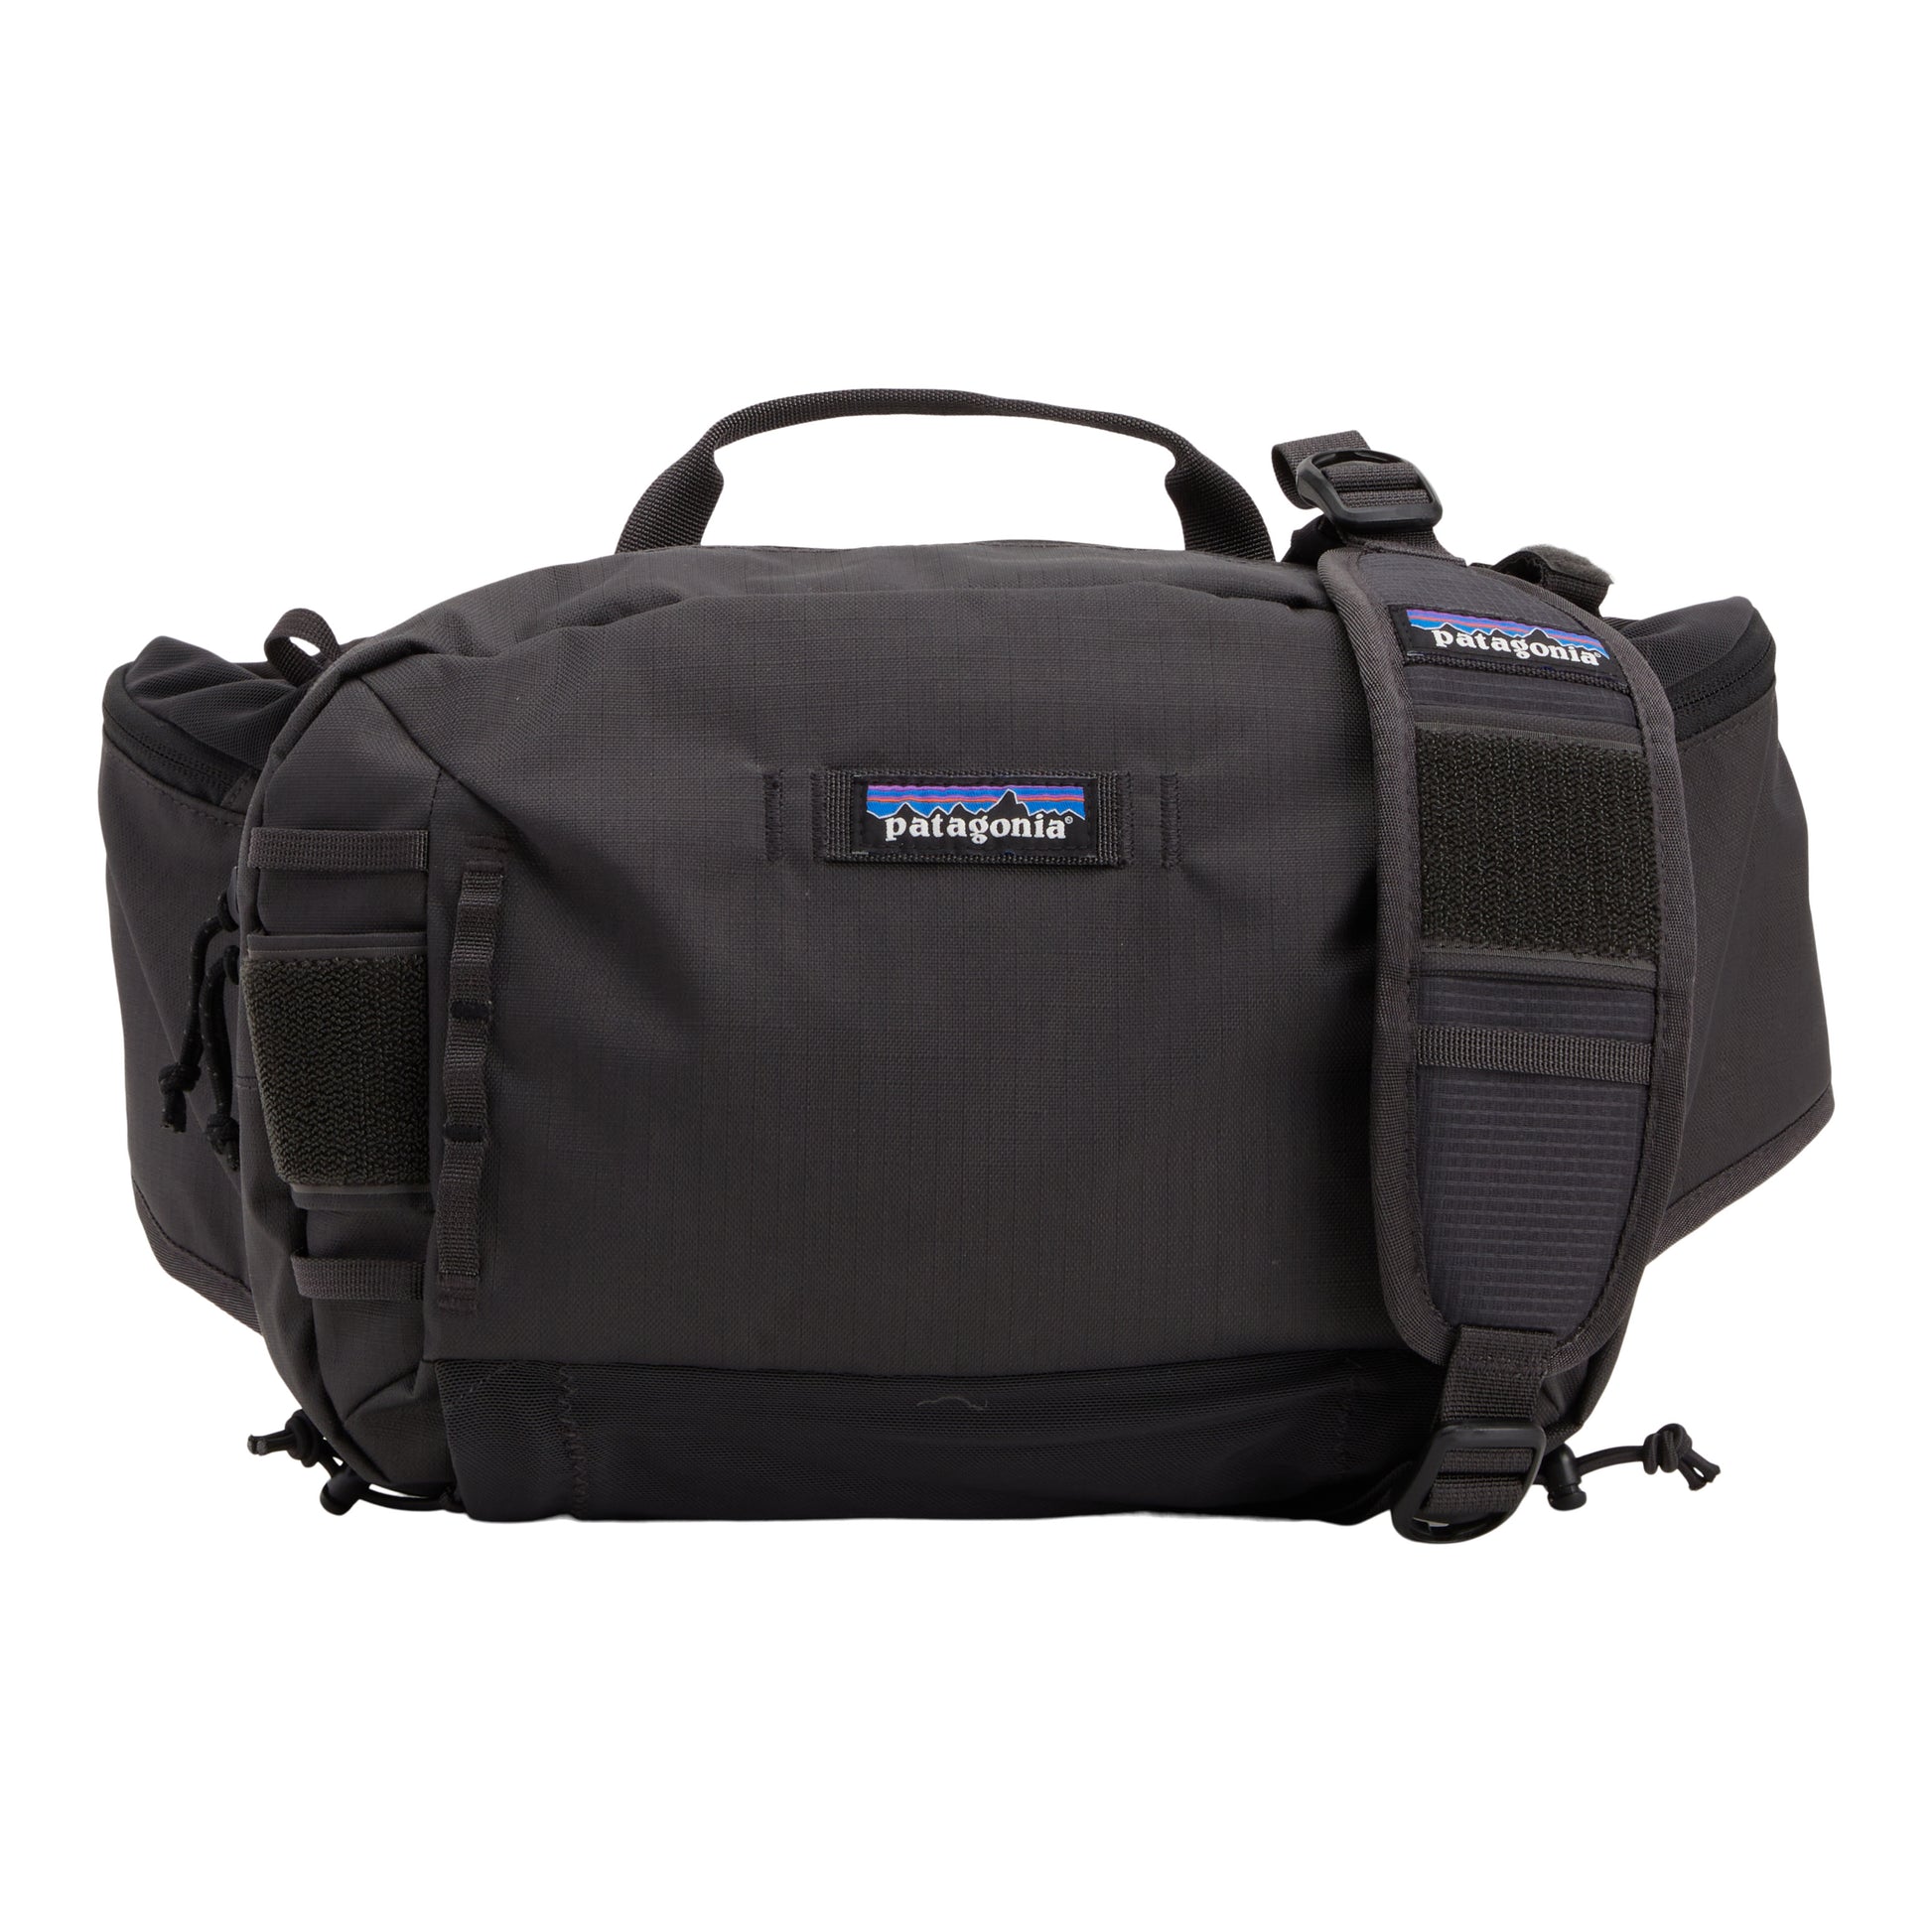 SOLD! – NEW PRICE! – Patagonia Stealth Hip Pack – NEVER USED